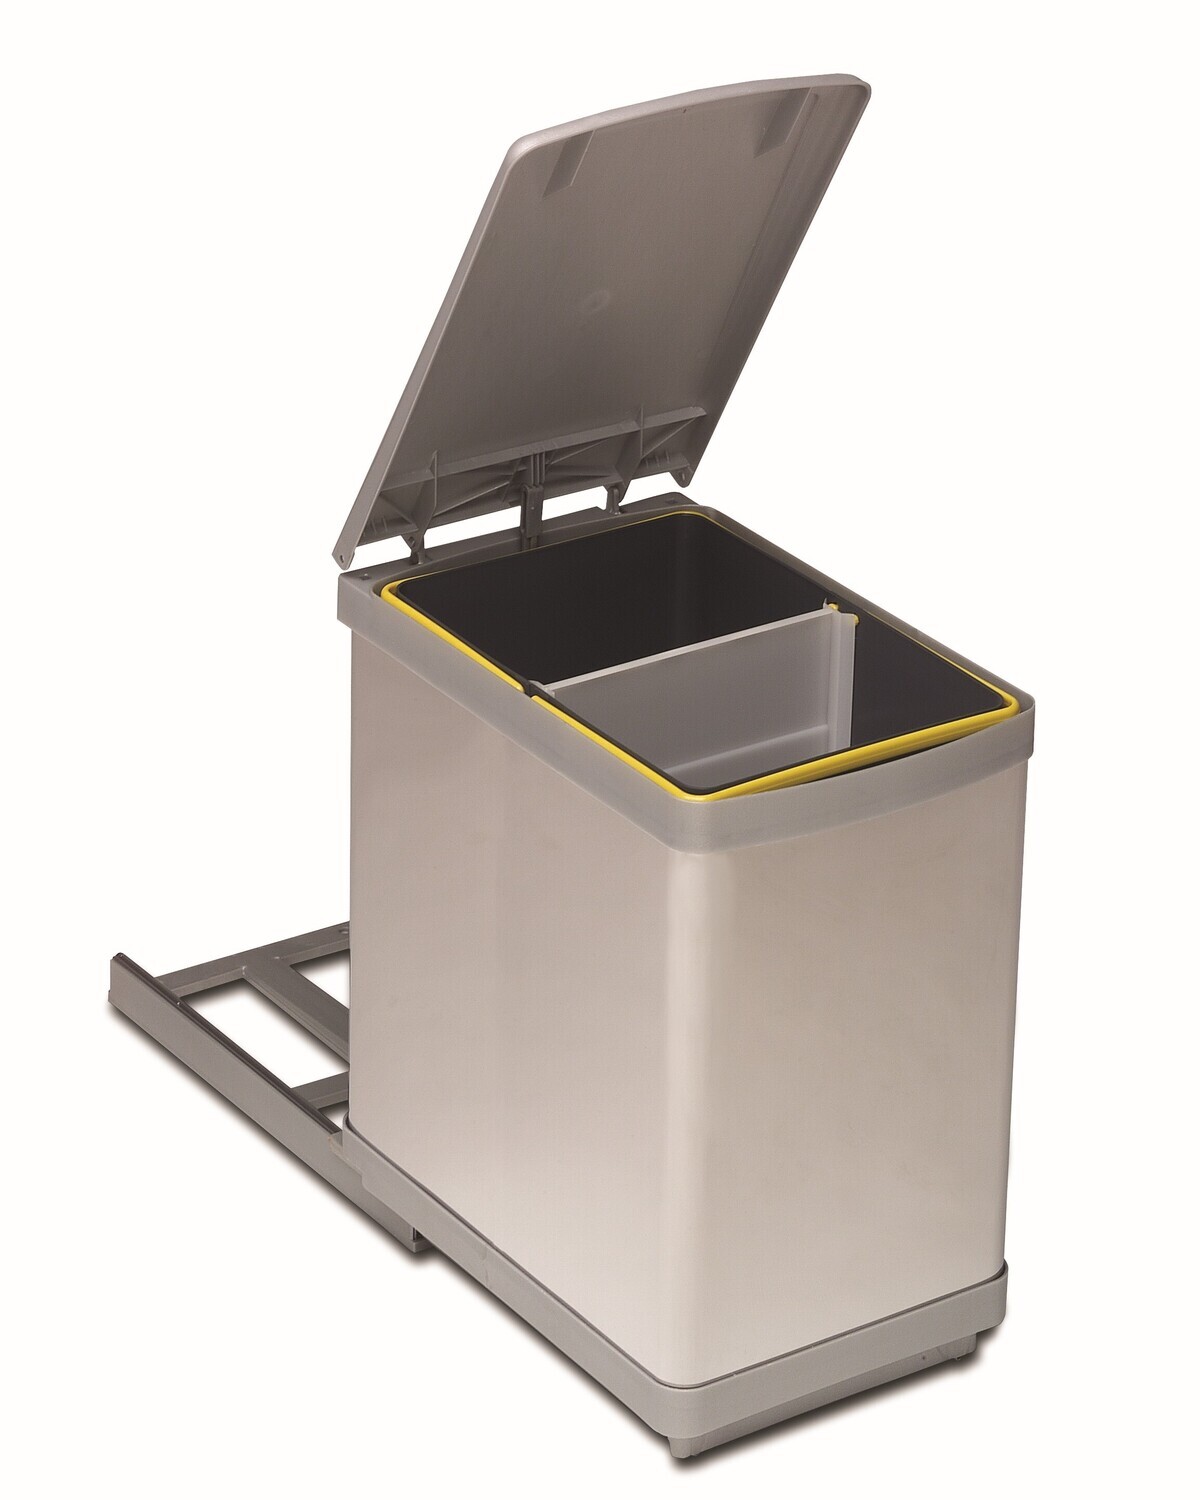 20 litre Stainless Steel Bin to Suit 300mm Cabinet